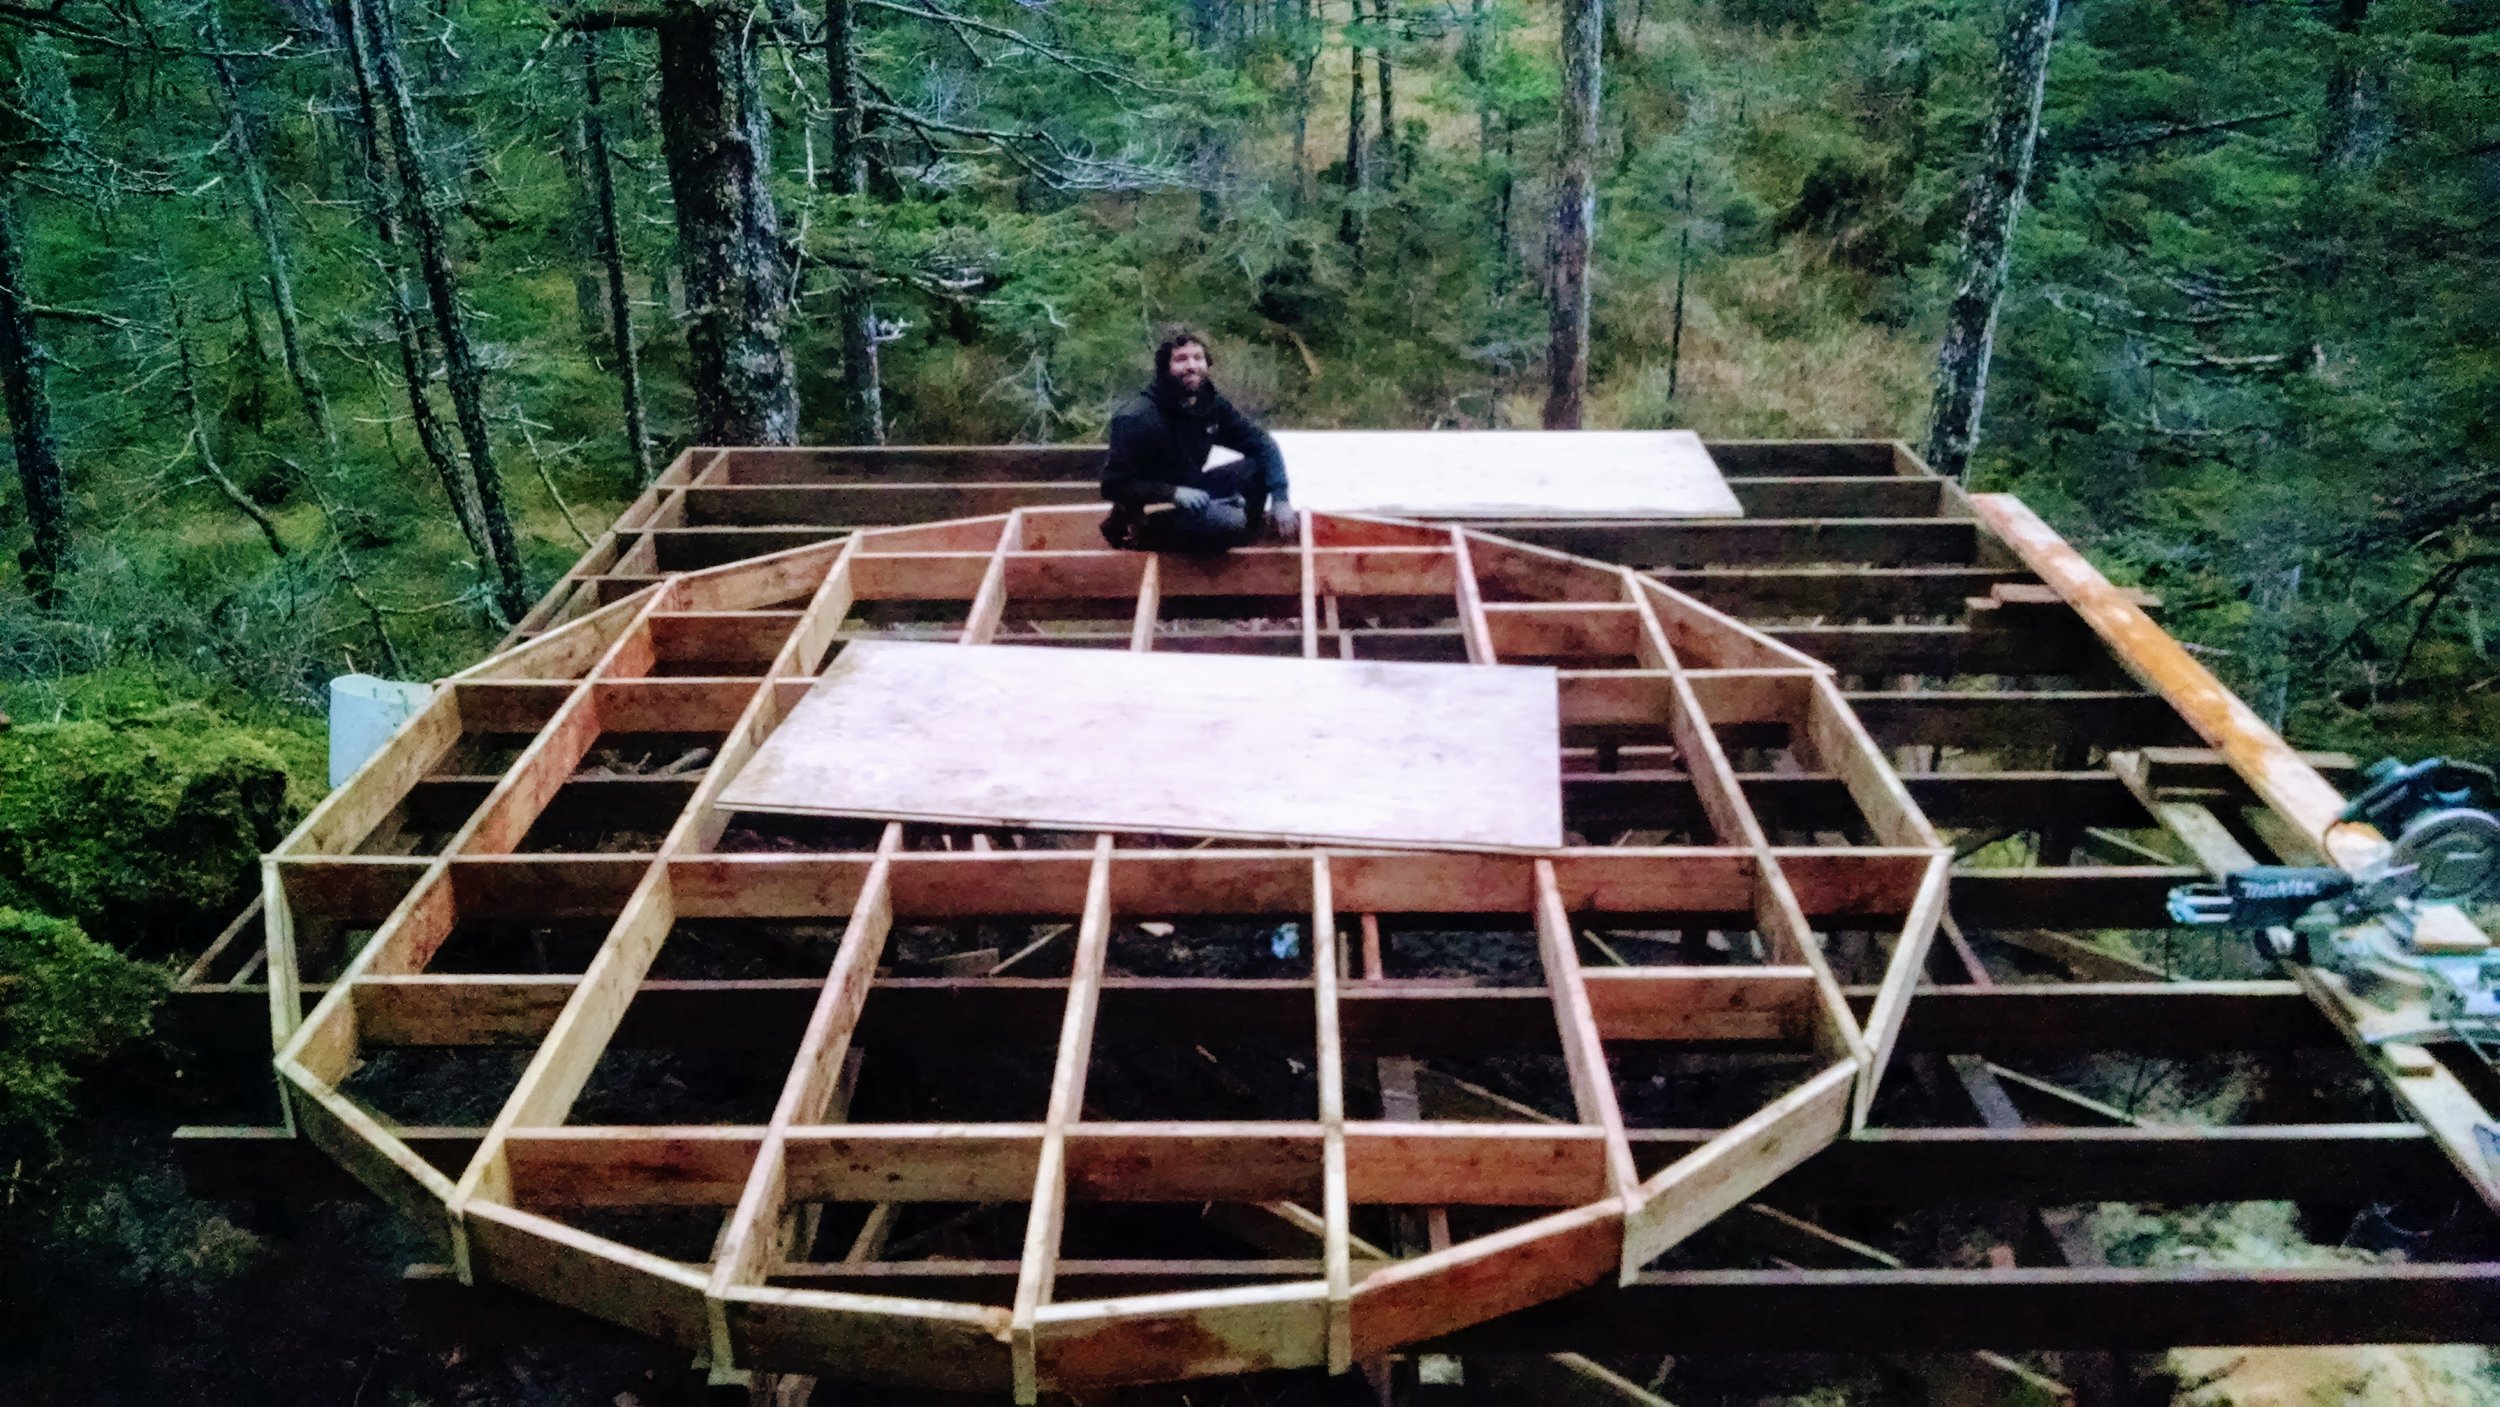  November 2, 2015: We are so close to getting the first yurt erected! At this point Izzy has returned home to Montana. Just Jason and Charity have been working together to finish the platform and get the yurt standing before taking a break for the wi